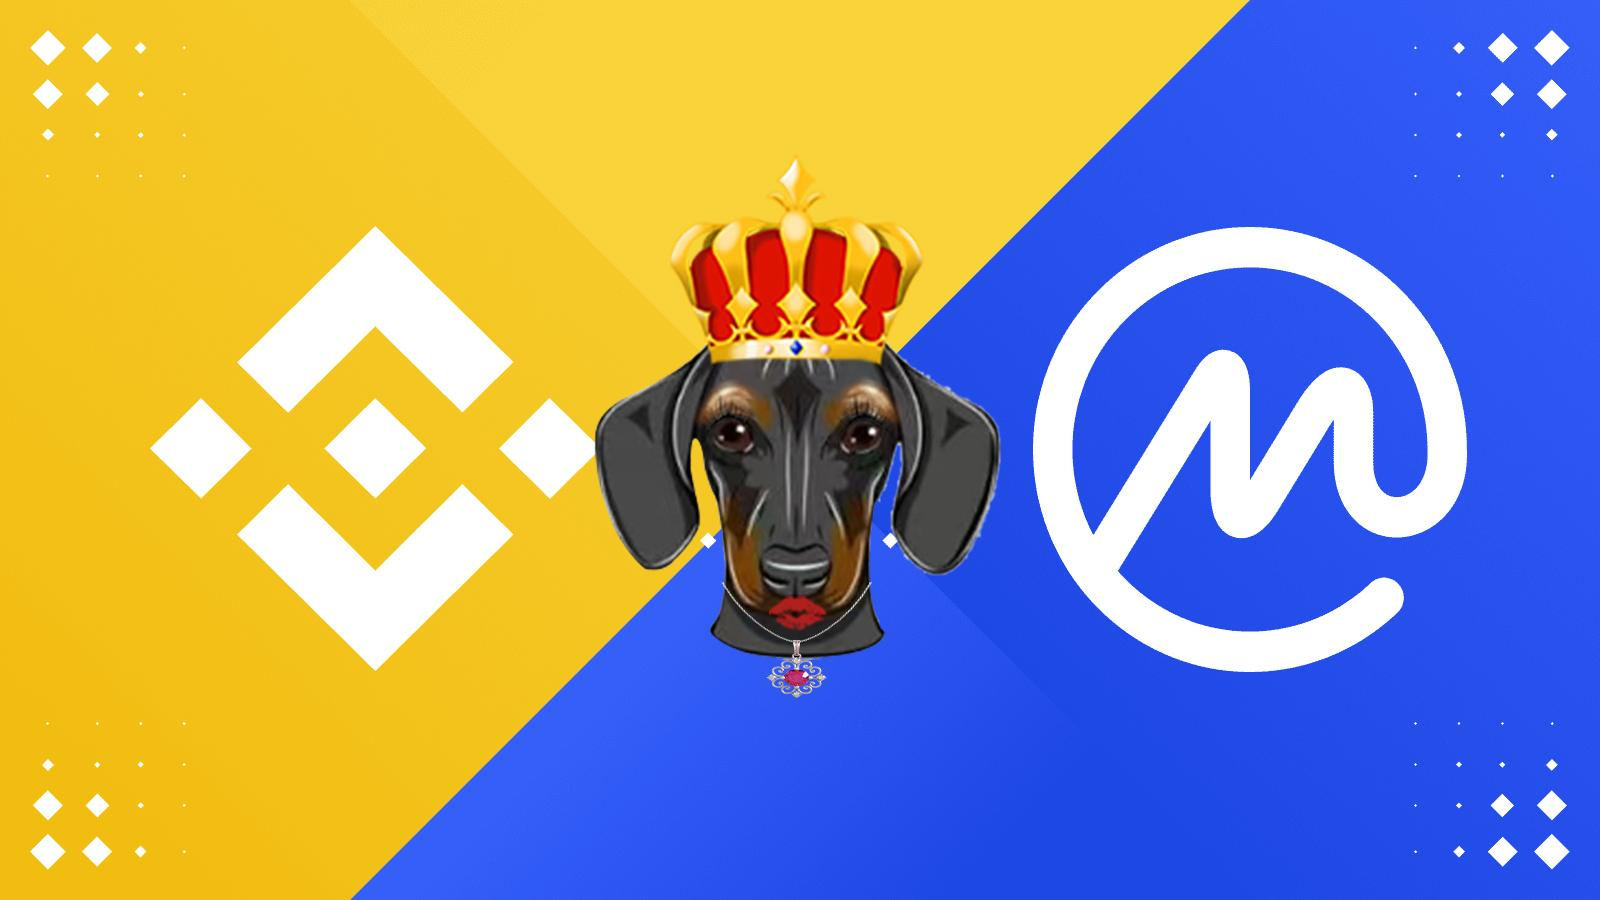 More great news! DogeQueen is listed on CMC and available now on Binance!